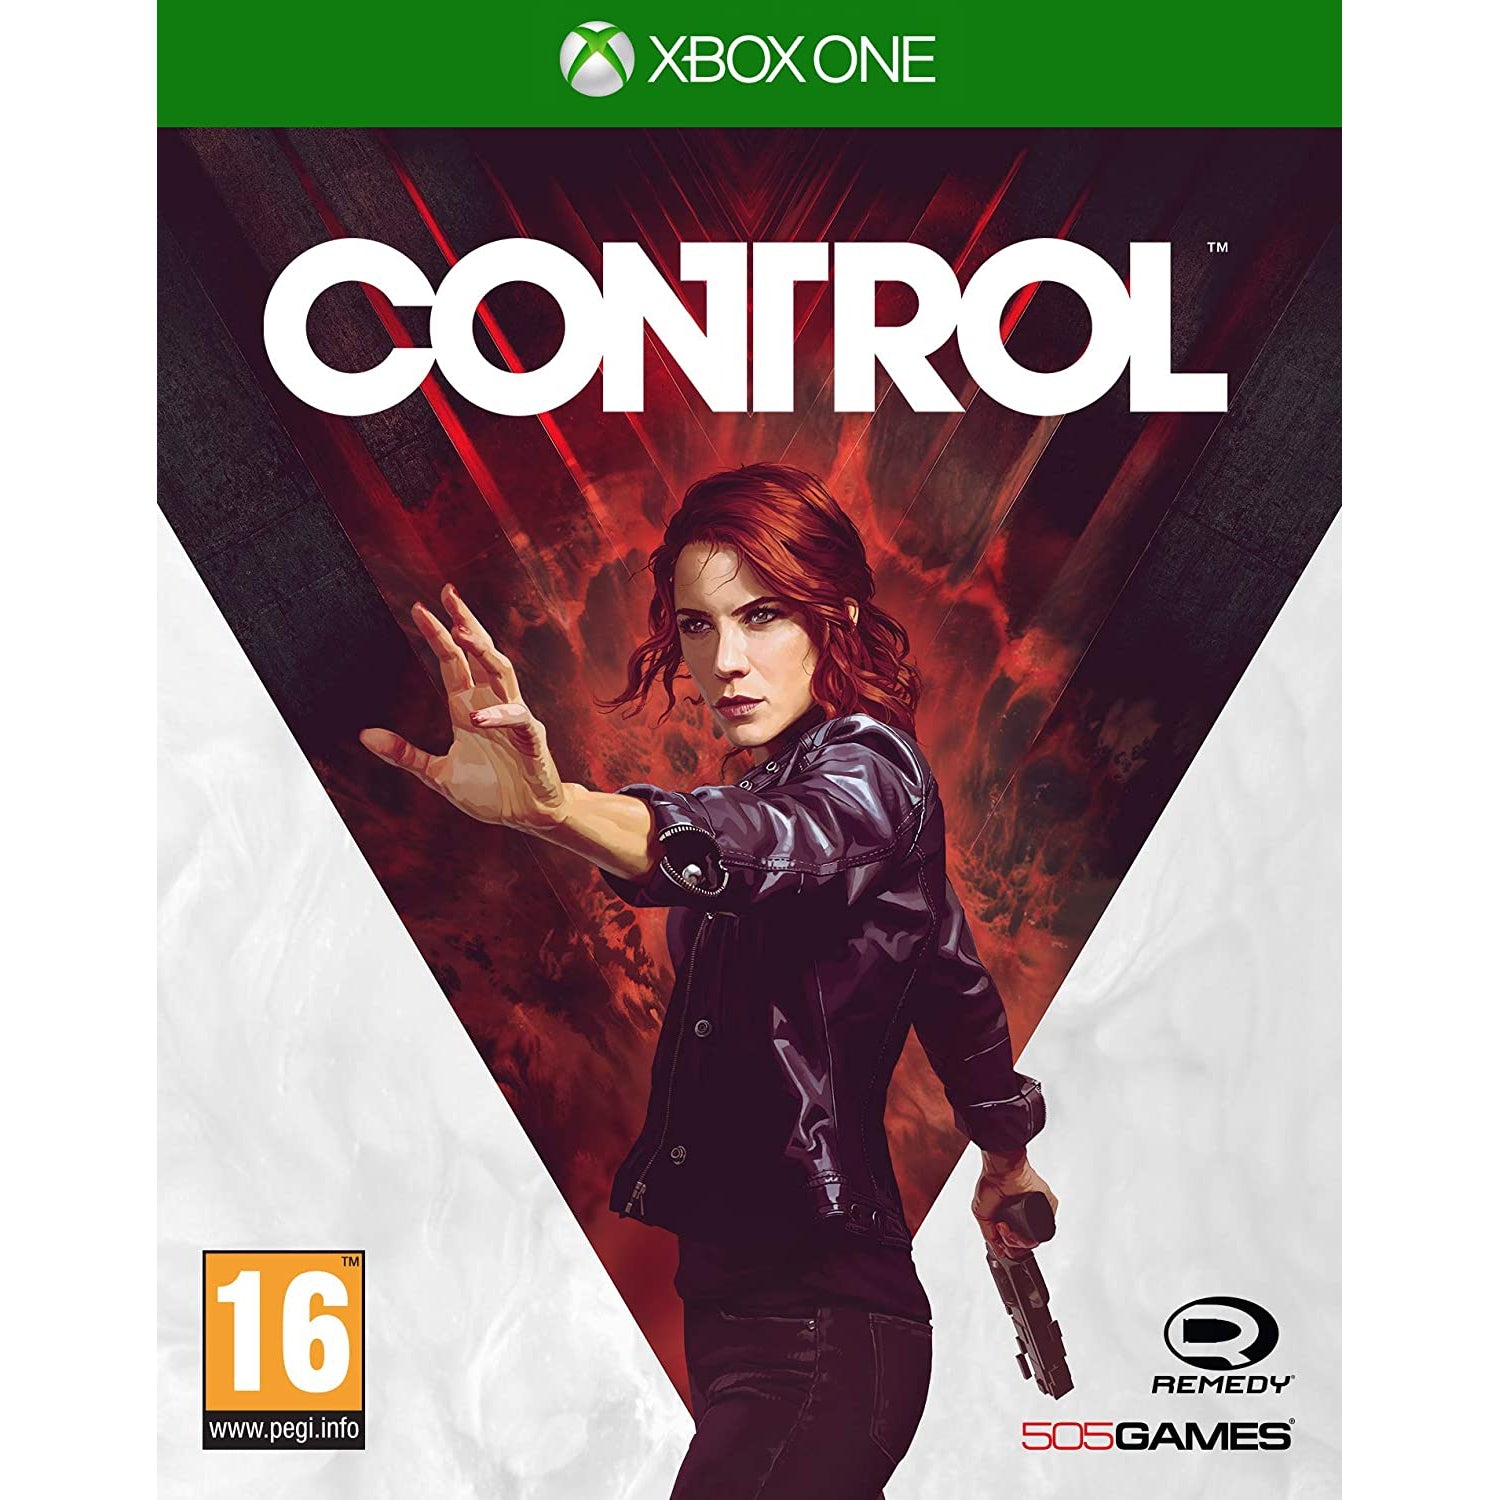 Control - Video Game for Xbox One Console (Xbox One)